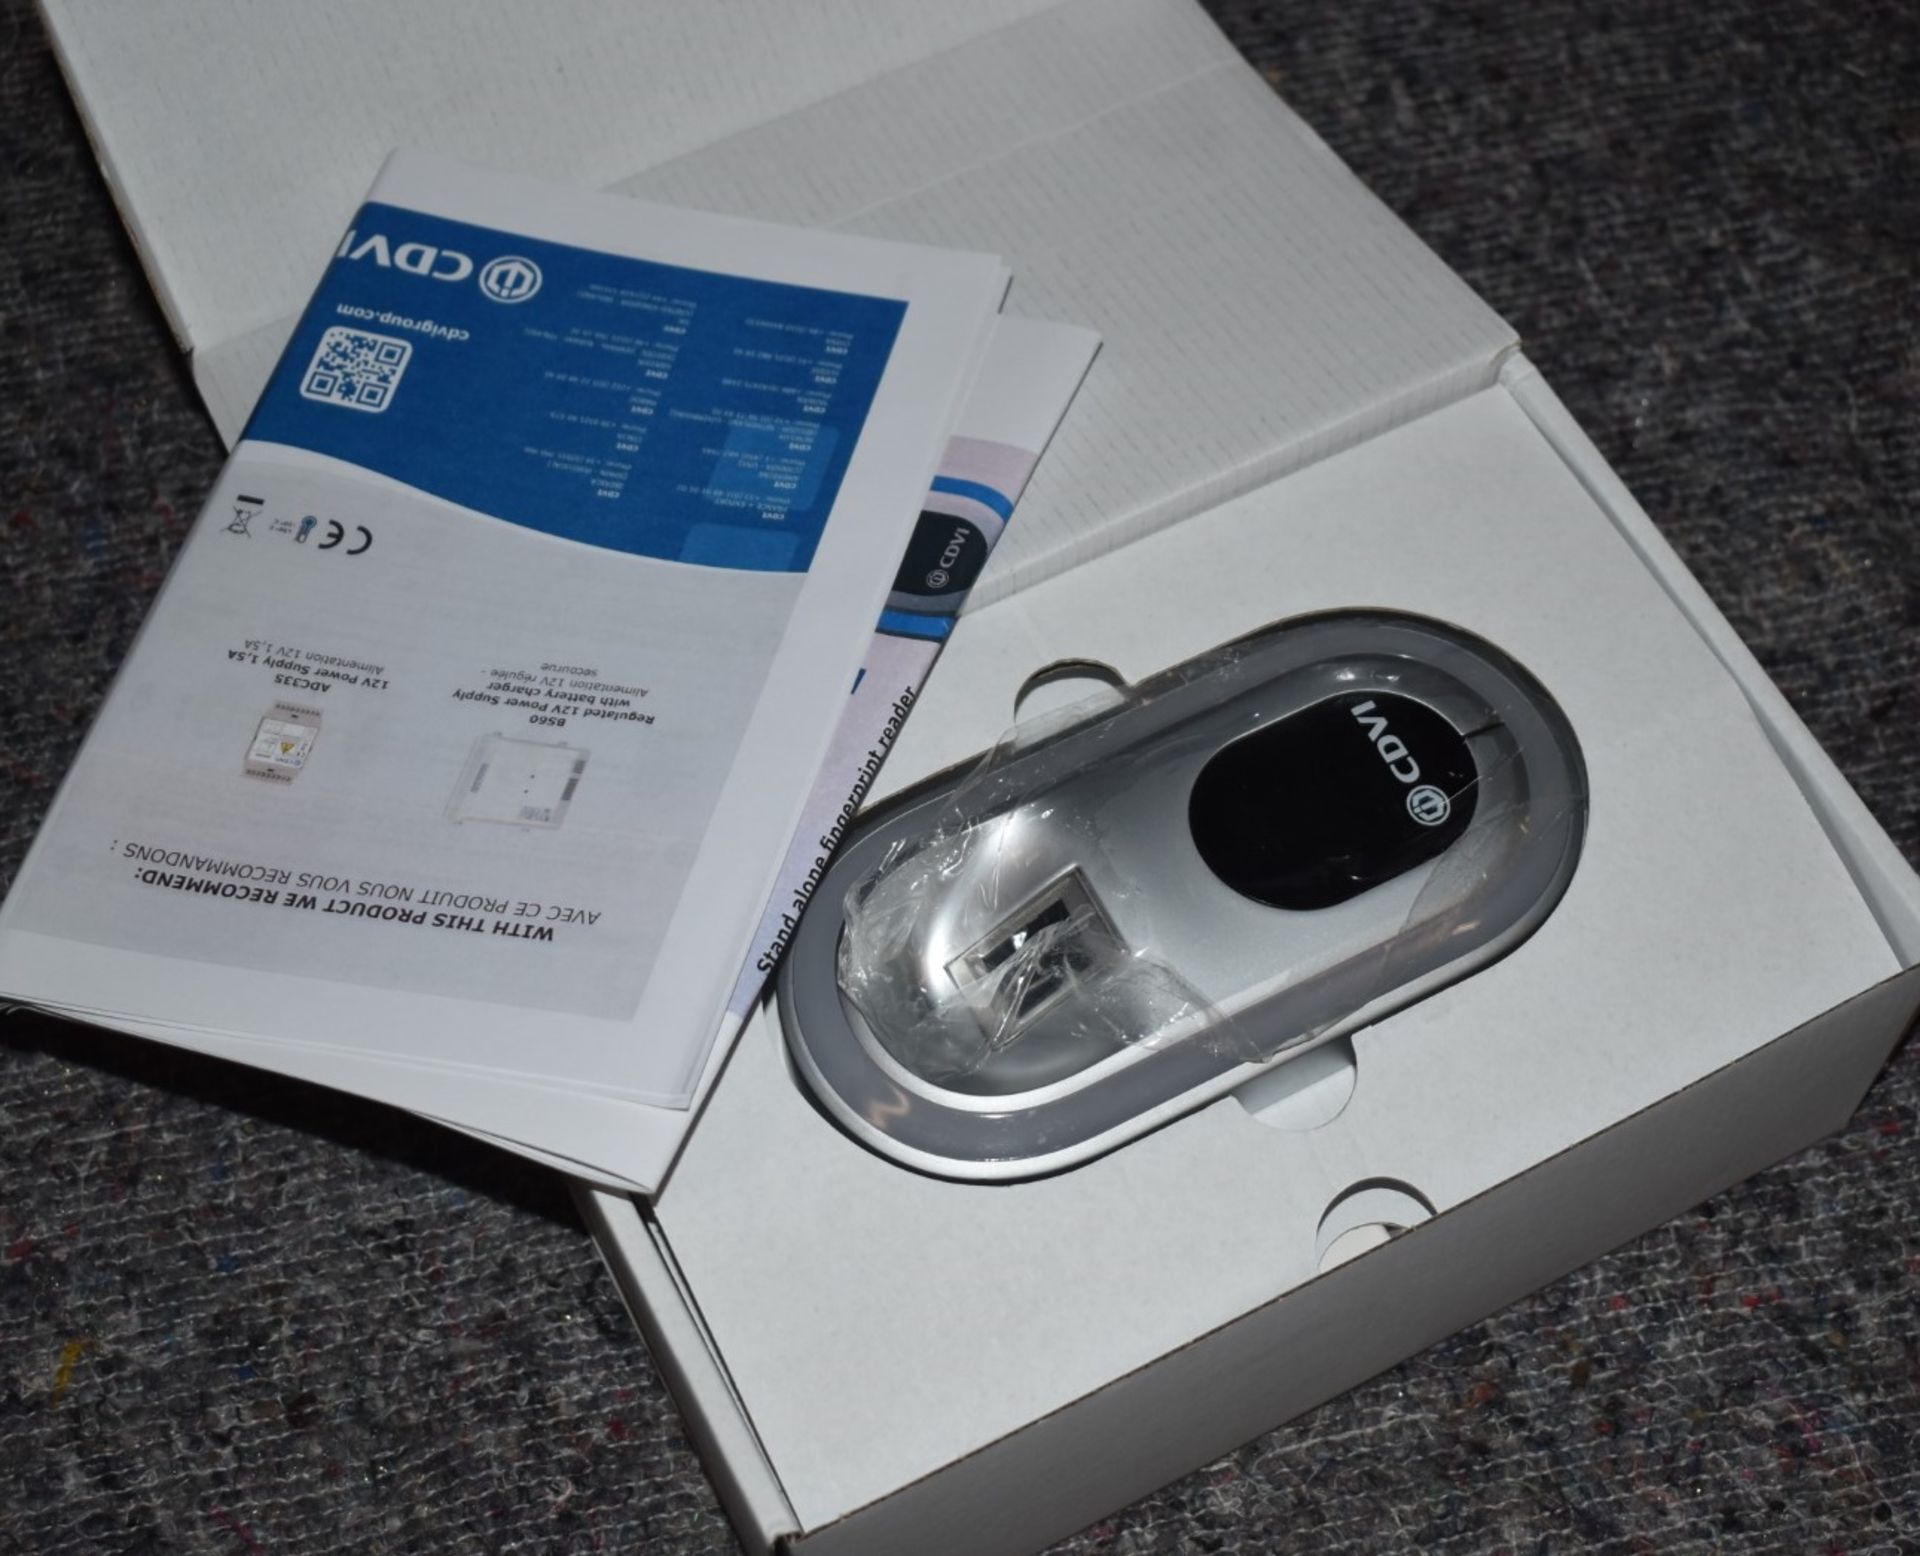 1 x CDVI BIOSYS1 Biometric Fingerprint Reader - New and Boxed - RRP £500 - Ref: In2137 wh1 pal1 - - Image 3 of 4